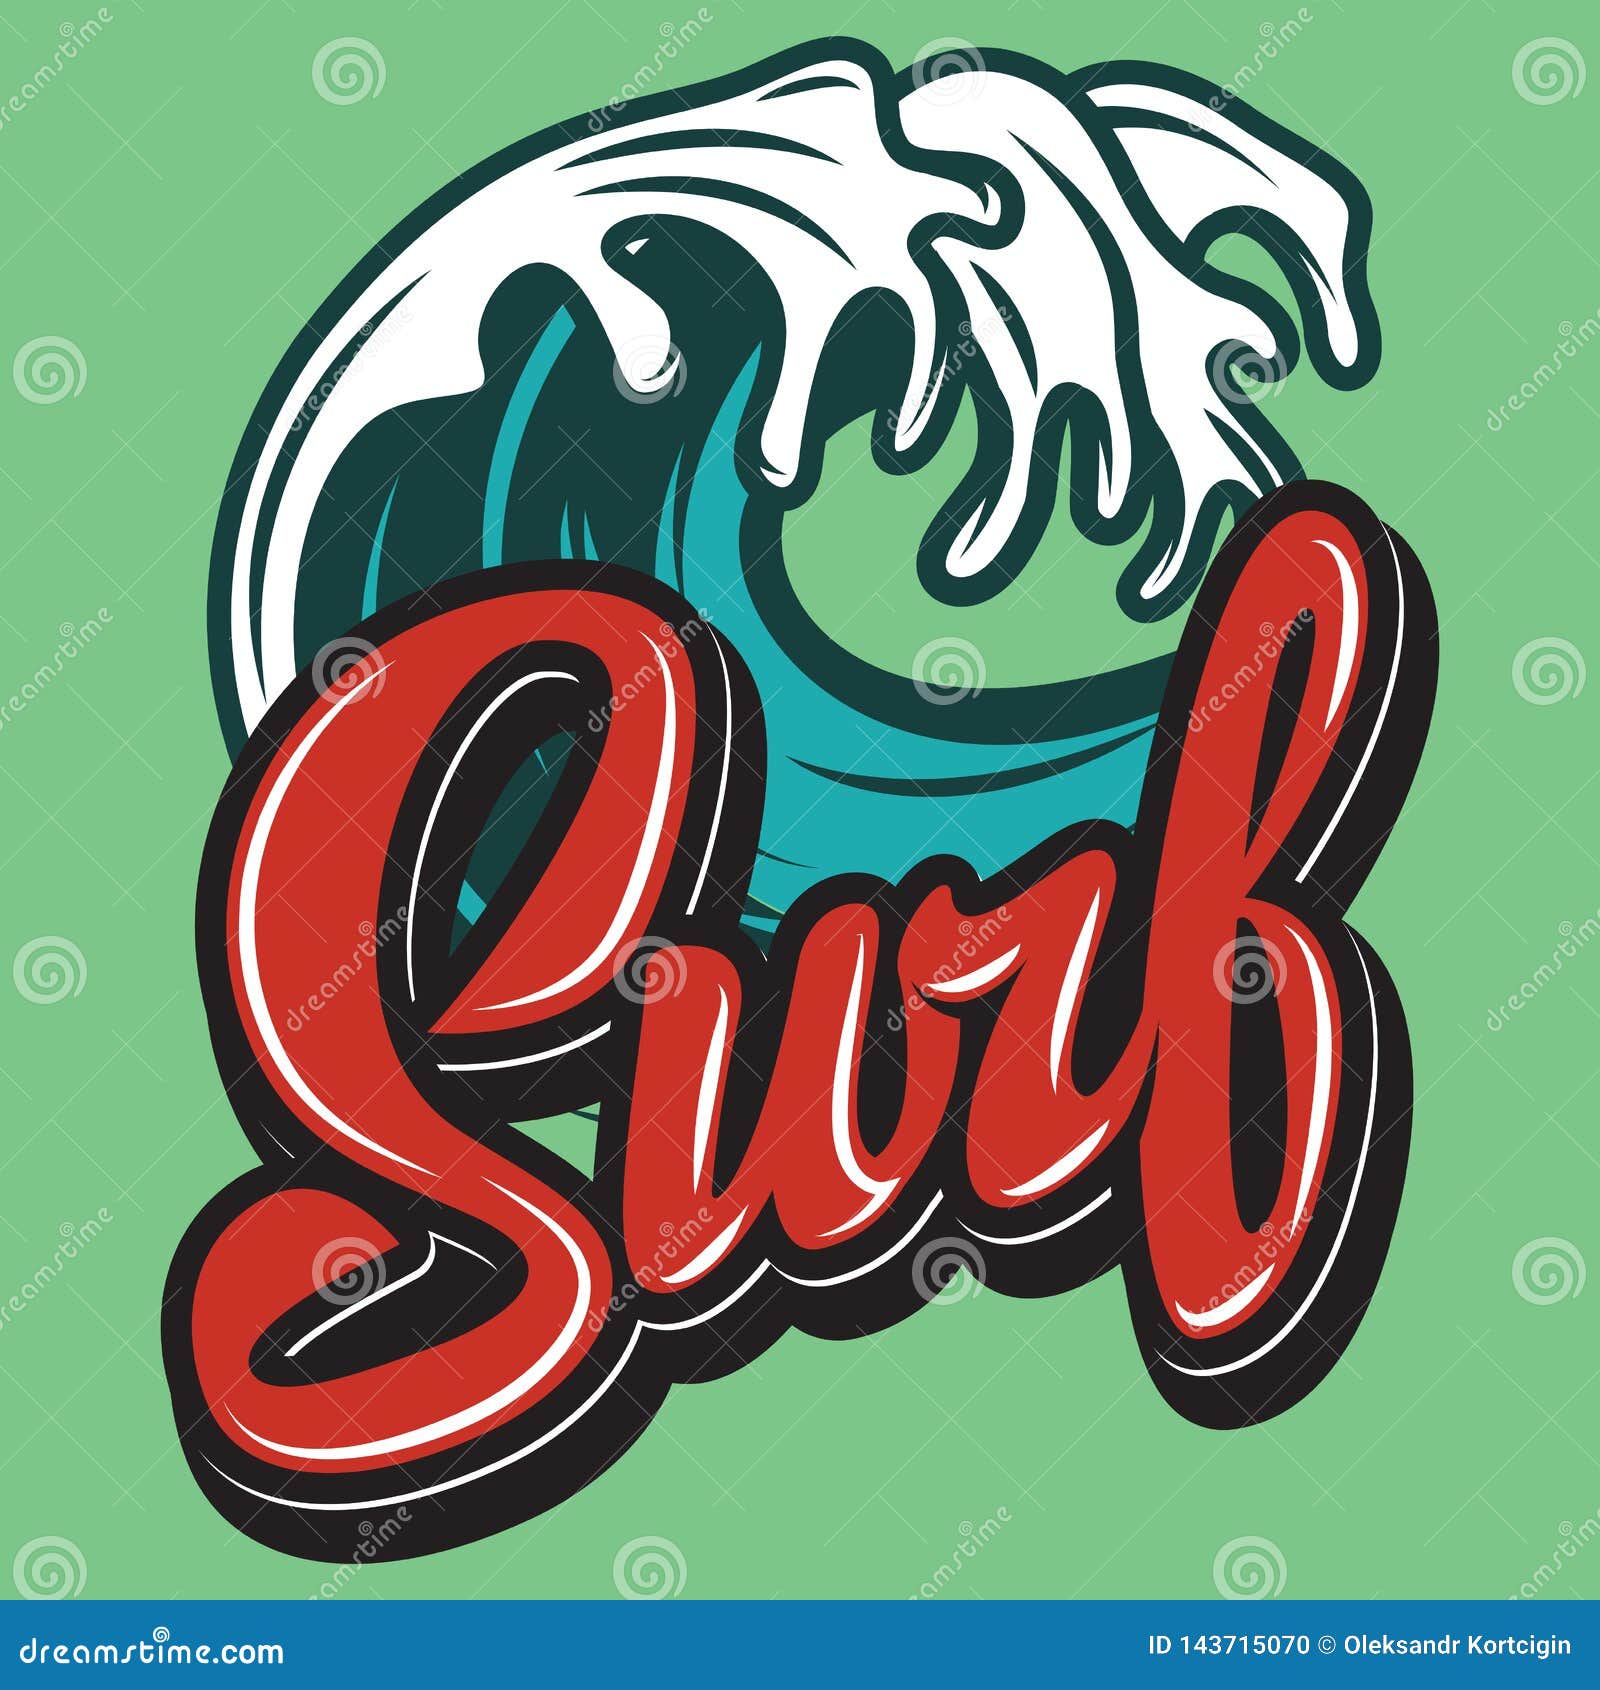 Vector Color Calligraphic Inscription Surfing with Wave Stock Vector ...